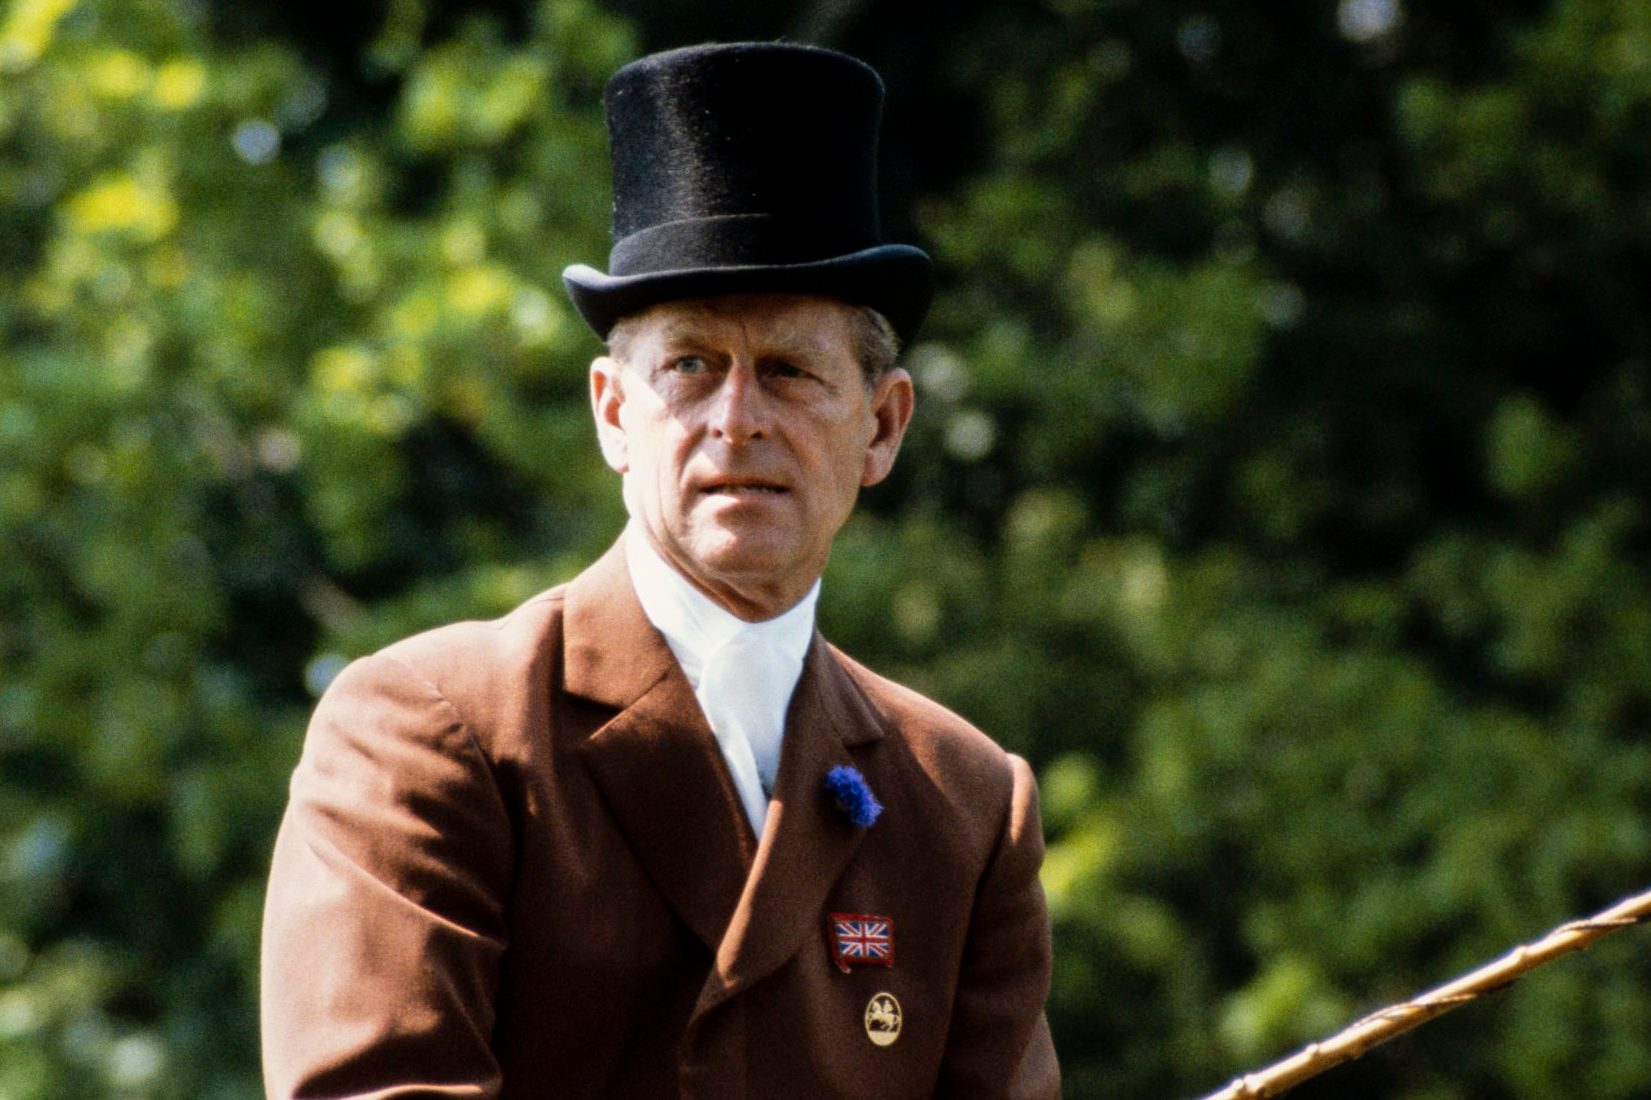 Prince Philip competes in the Carriage Driving section at the Windsor Horse Show